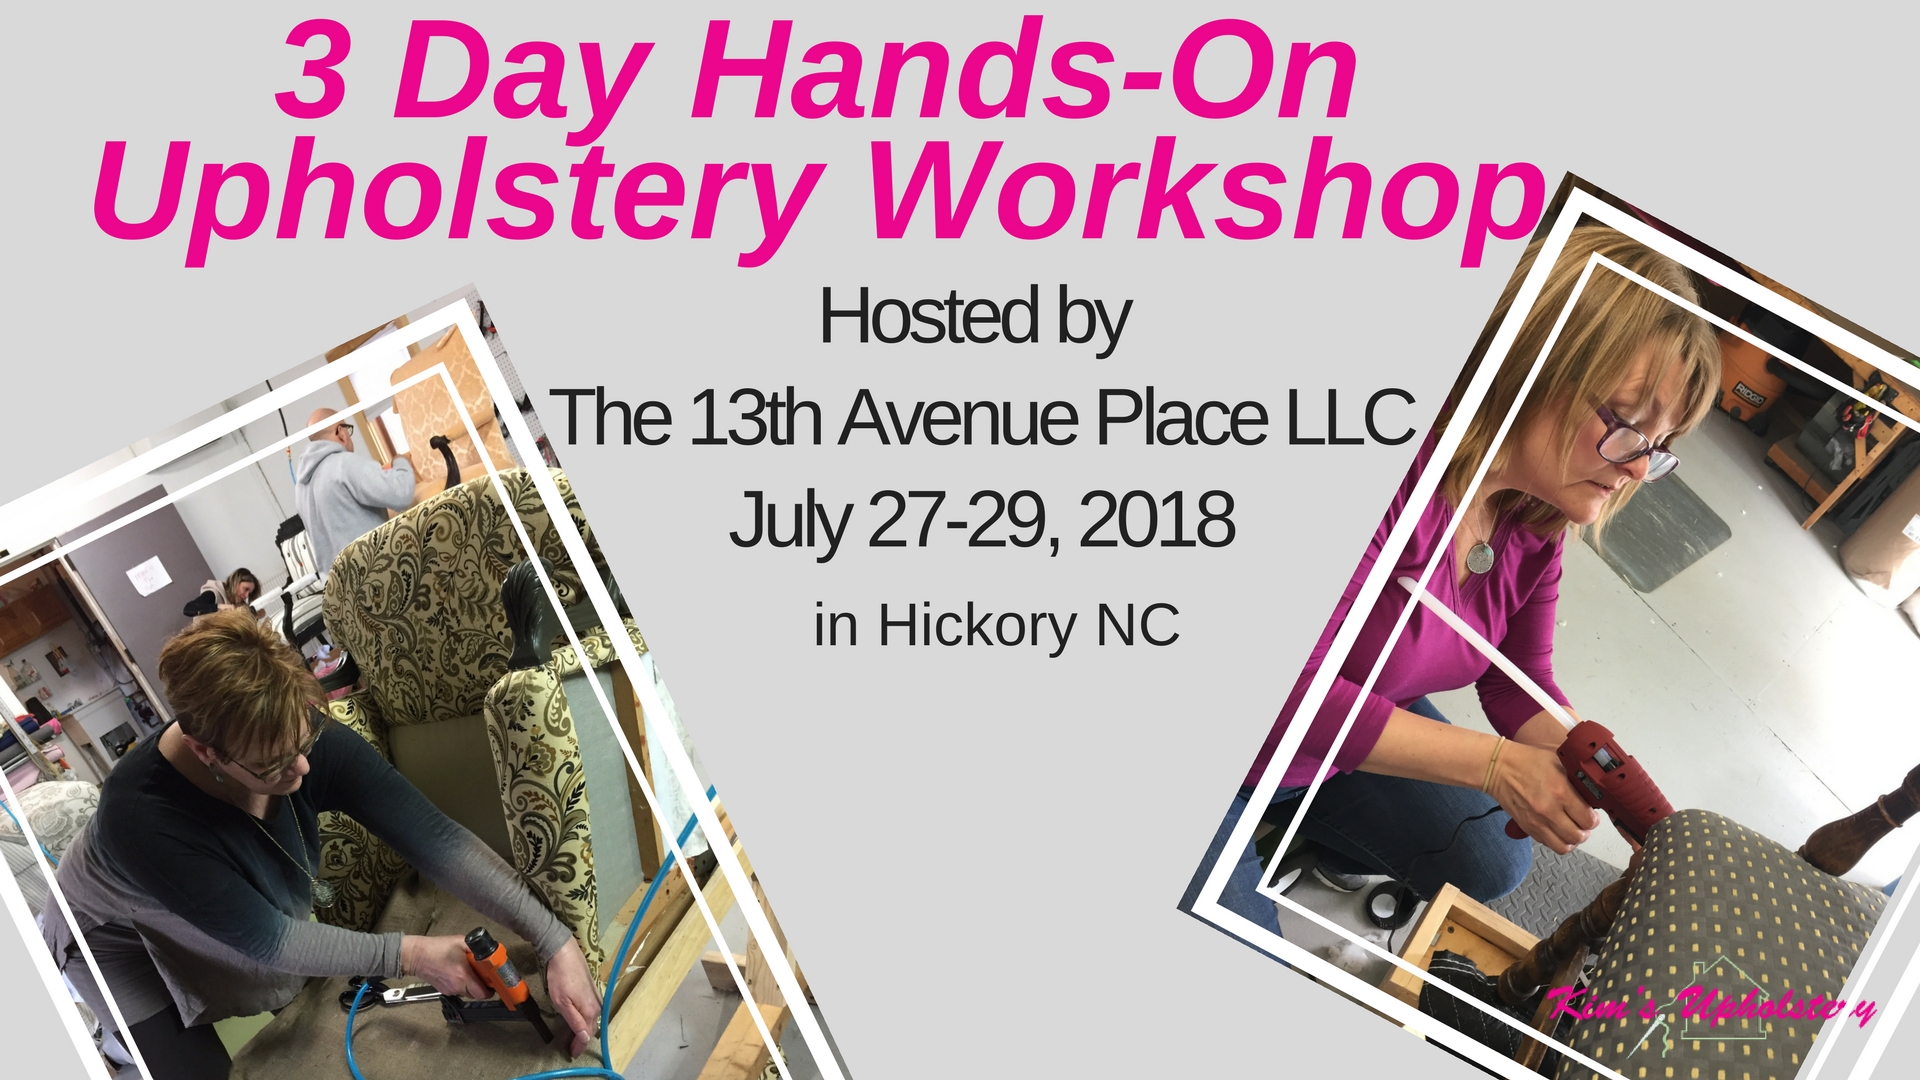 Hands-on Upholstery Training Workshop Hickory NC